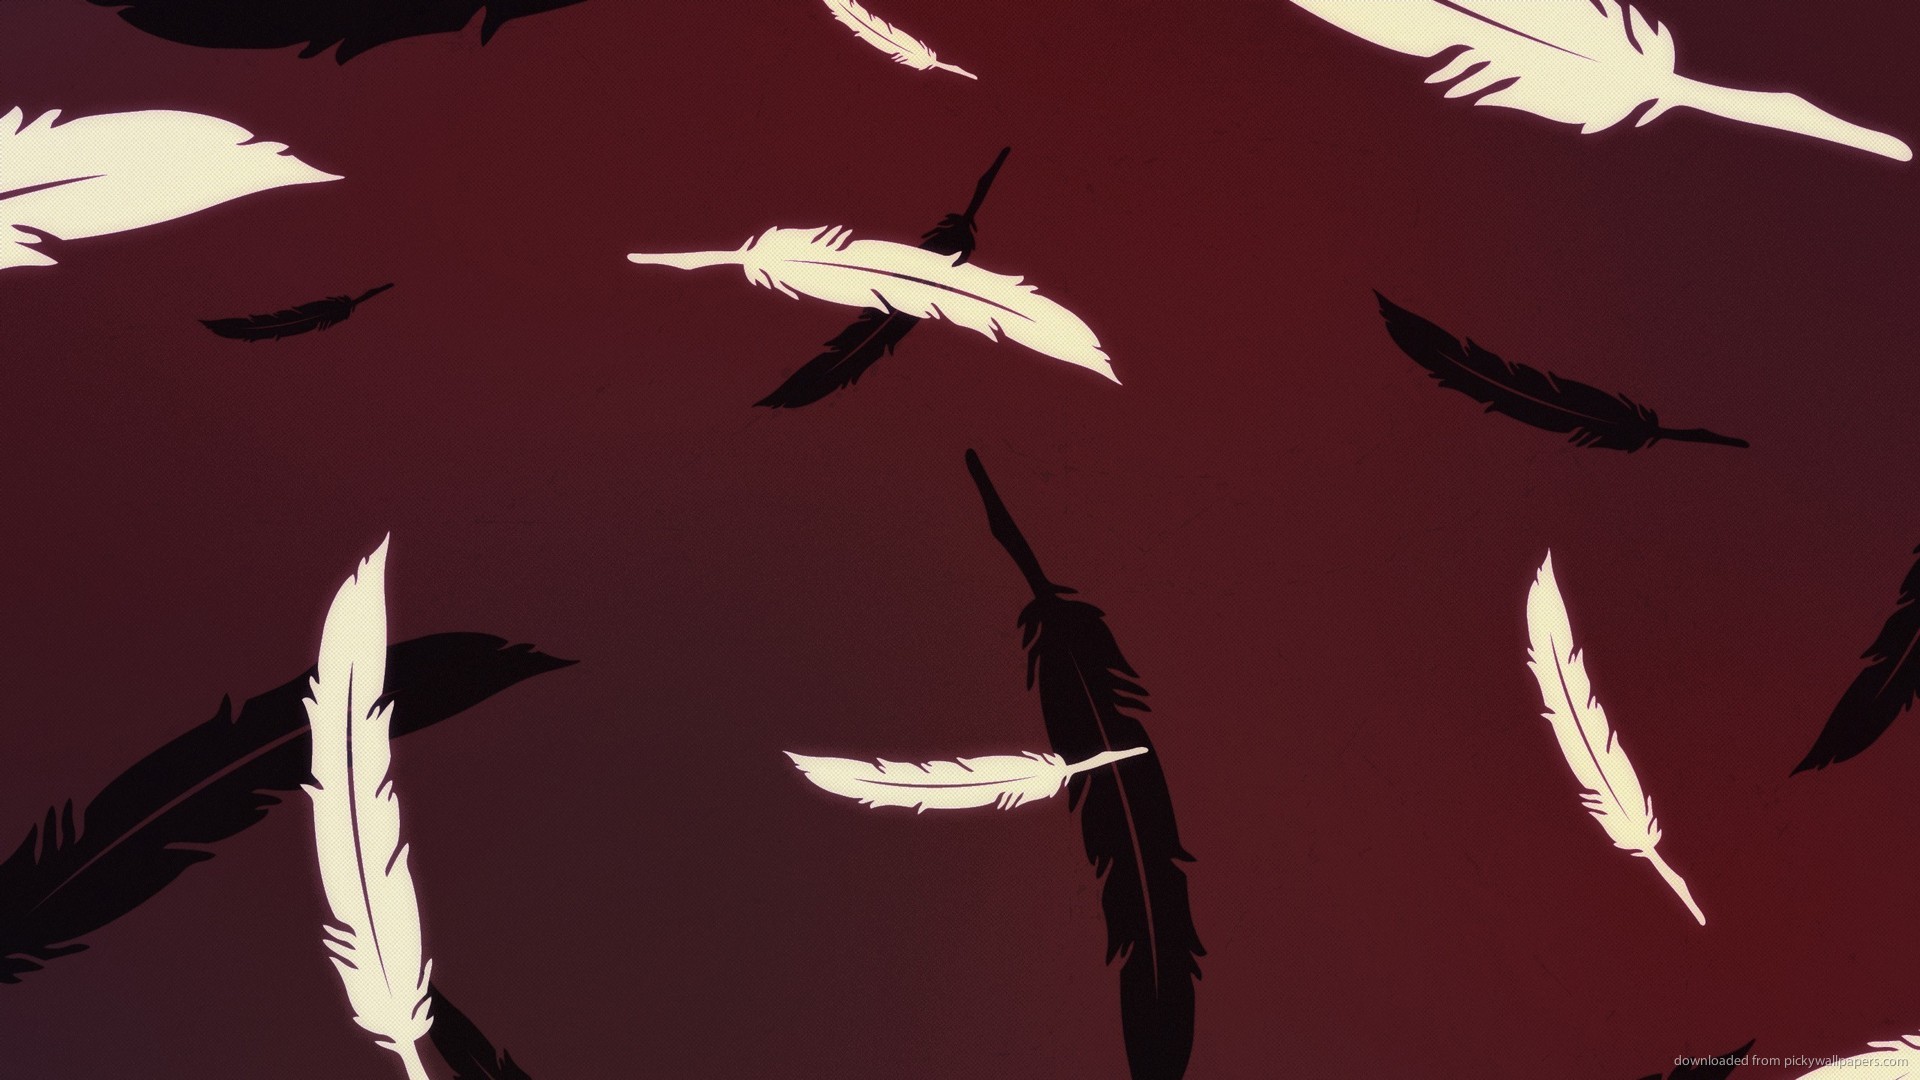 1920x1080 Digital Feathers On Maroon Background for 